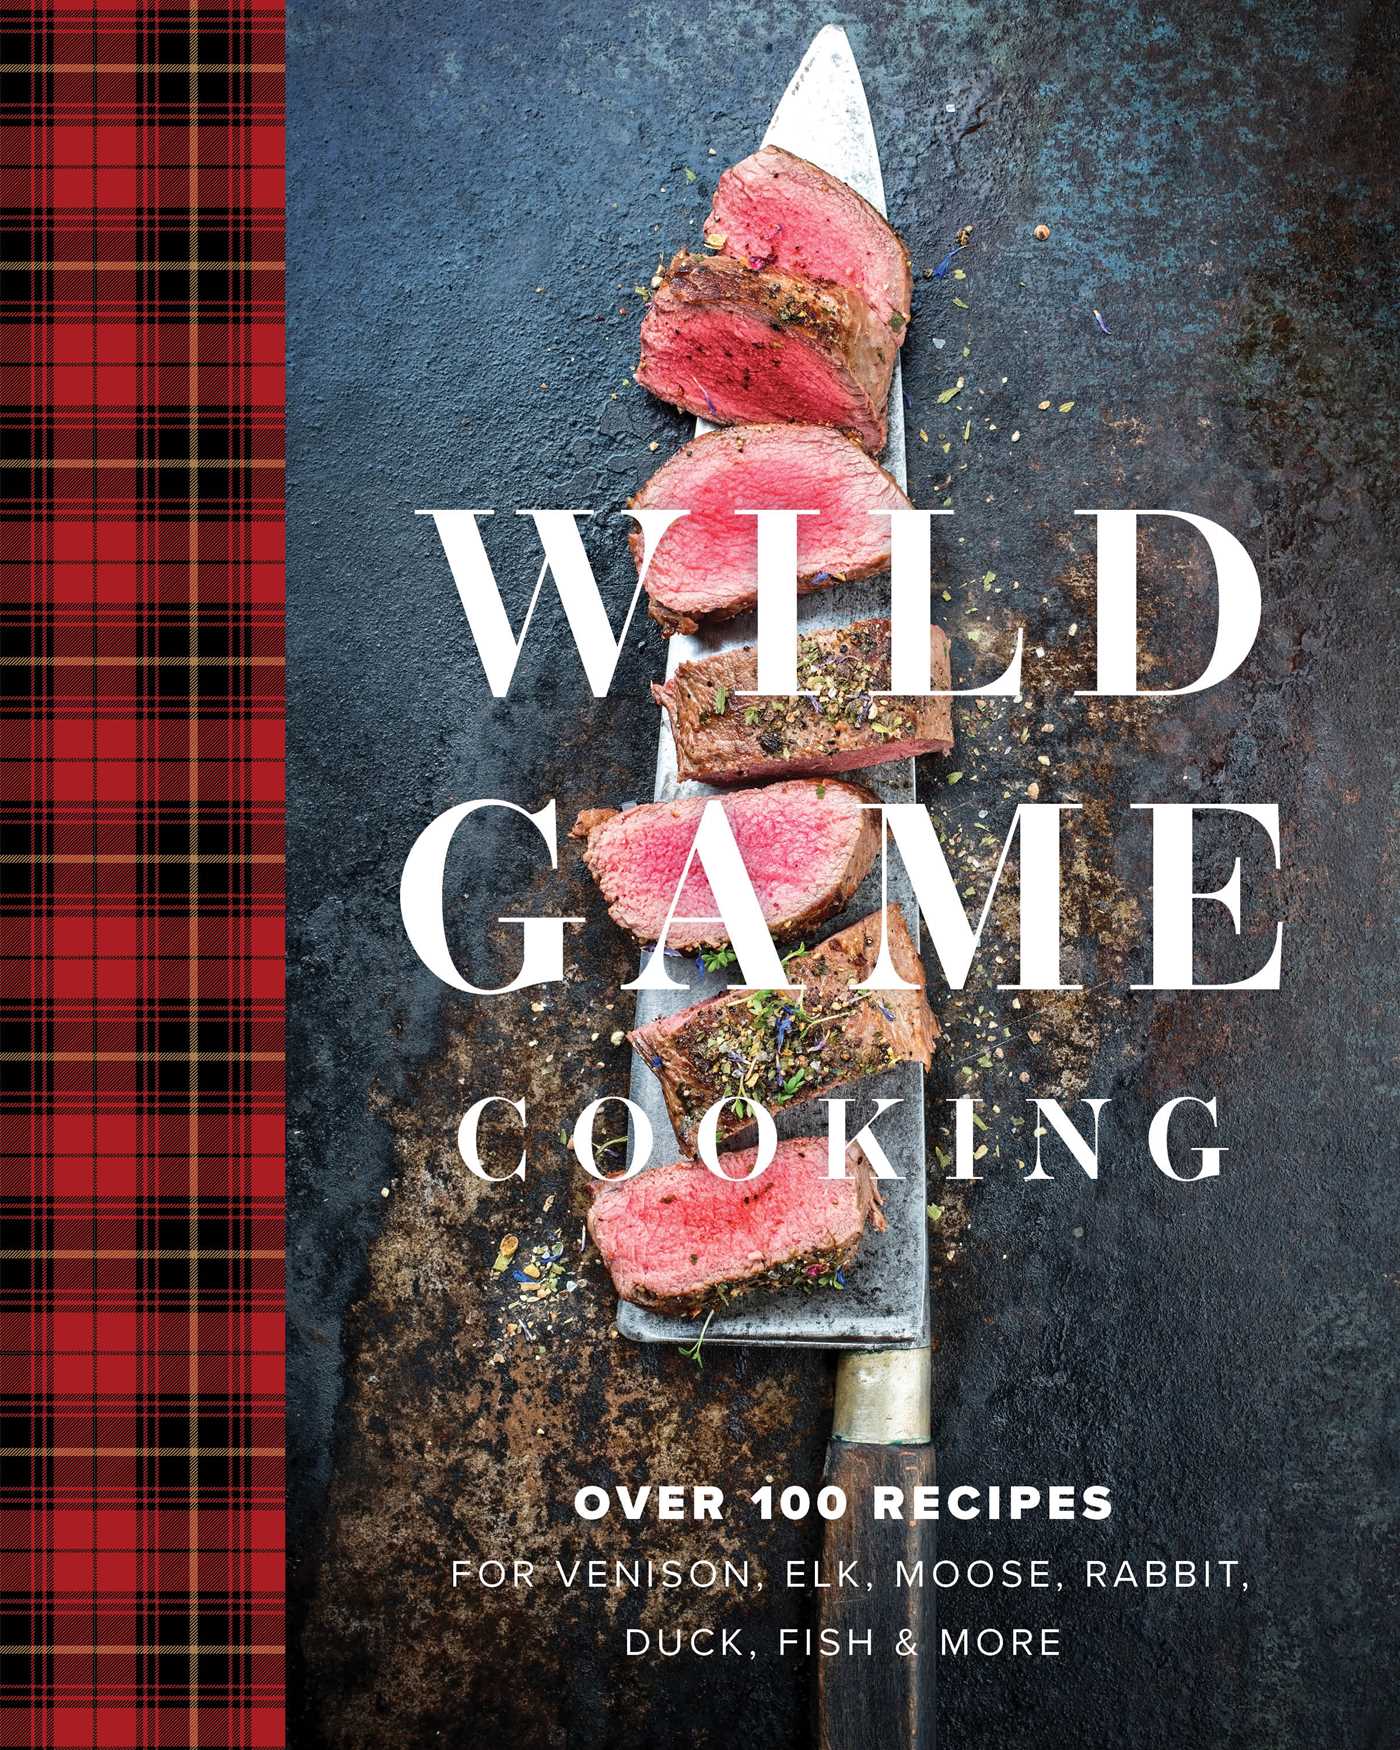 Wild Game Cooking: Over 100 Recipes for Venison, Elk, Moose, Rabbit, Duck, Fish & More